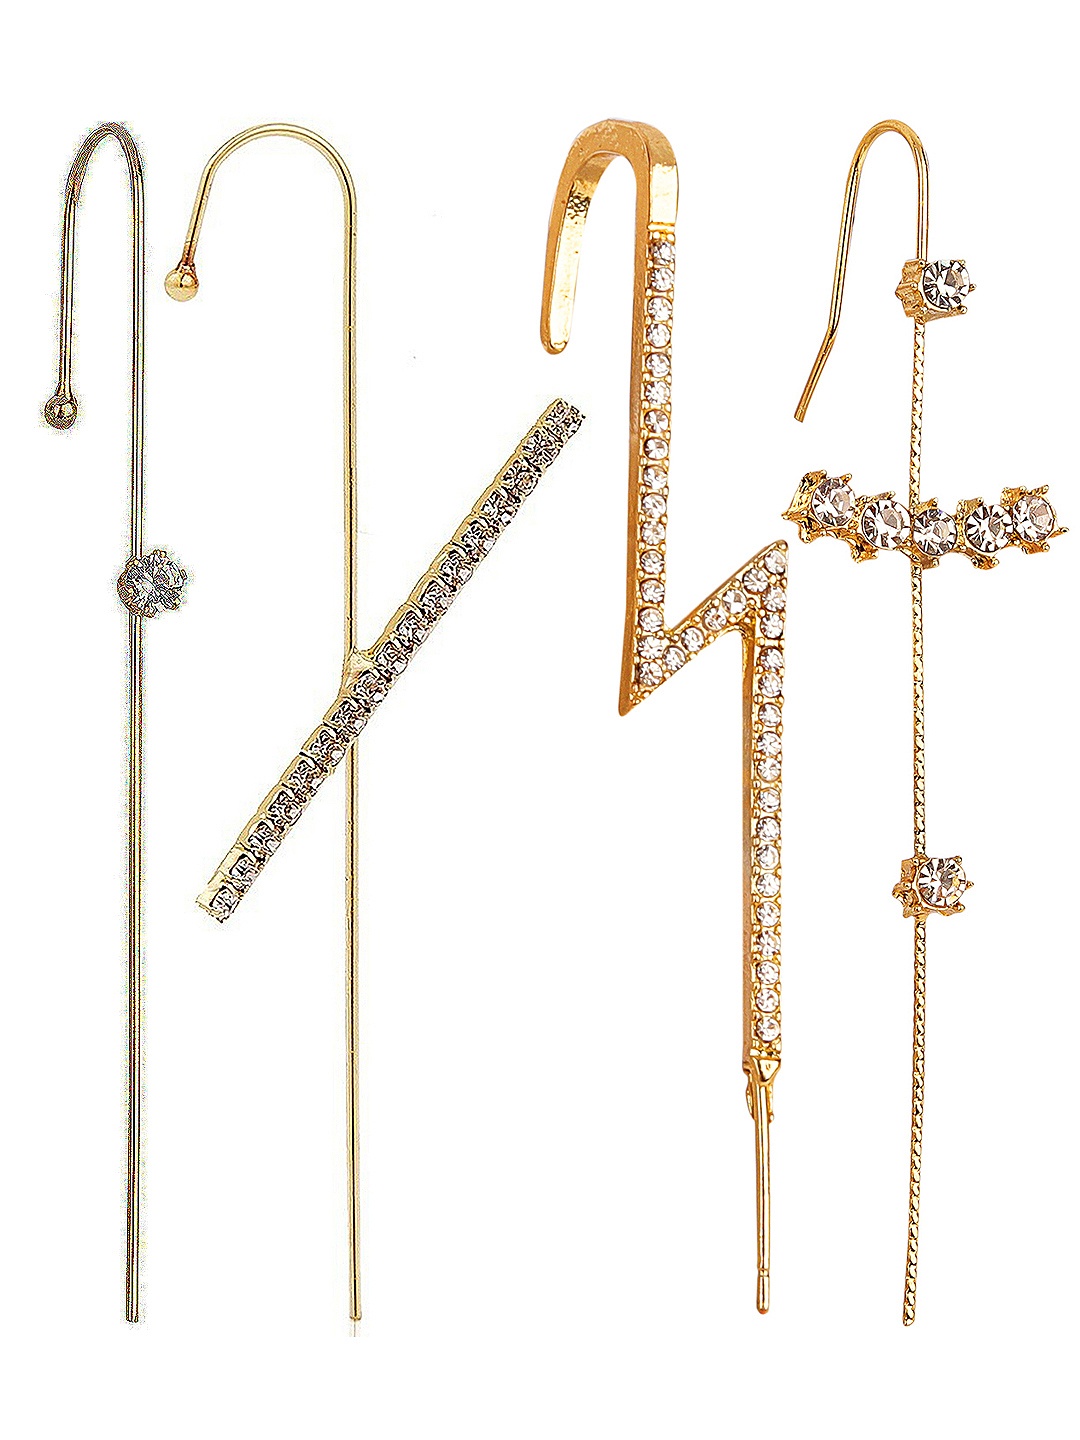 

Vembley Set of 4 Gold-Toned Spiked Drop Earrings